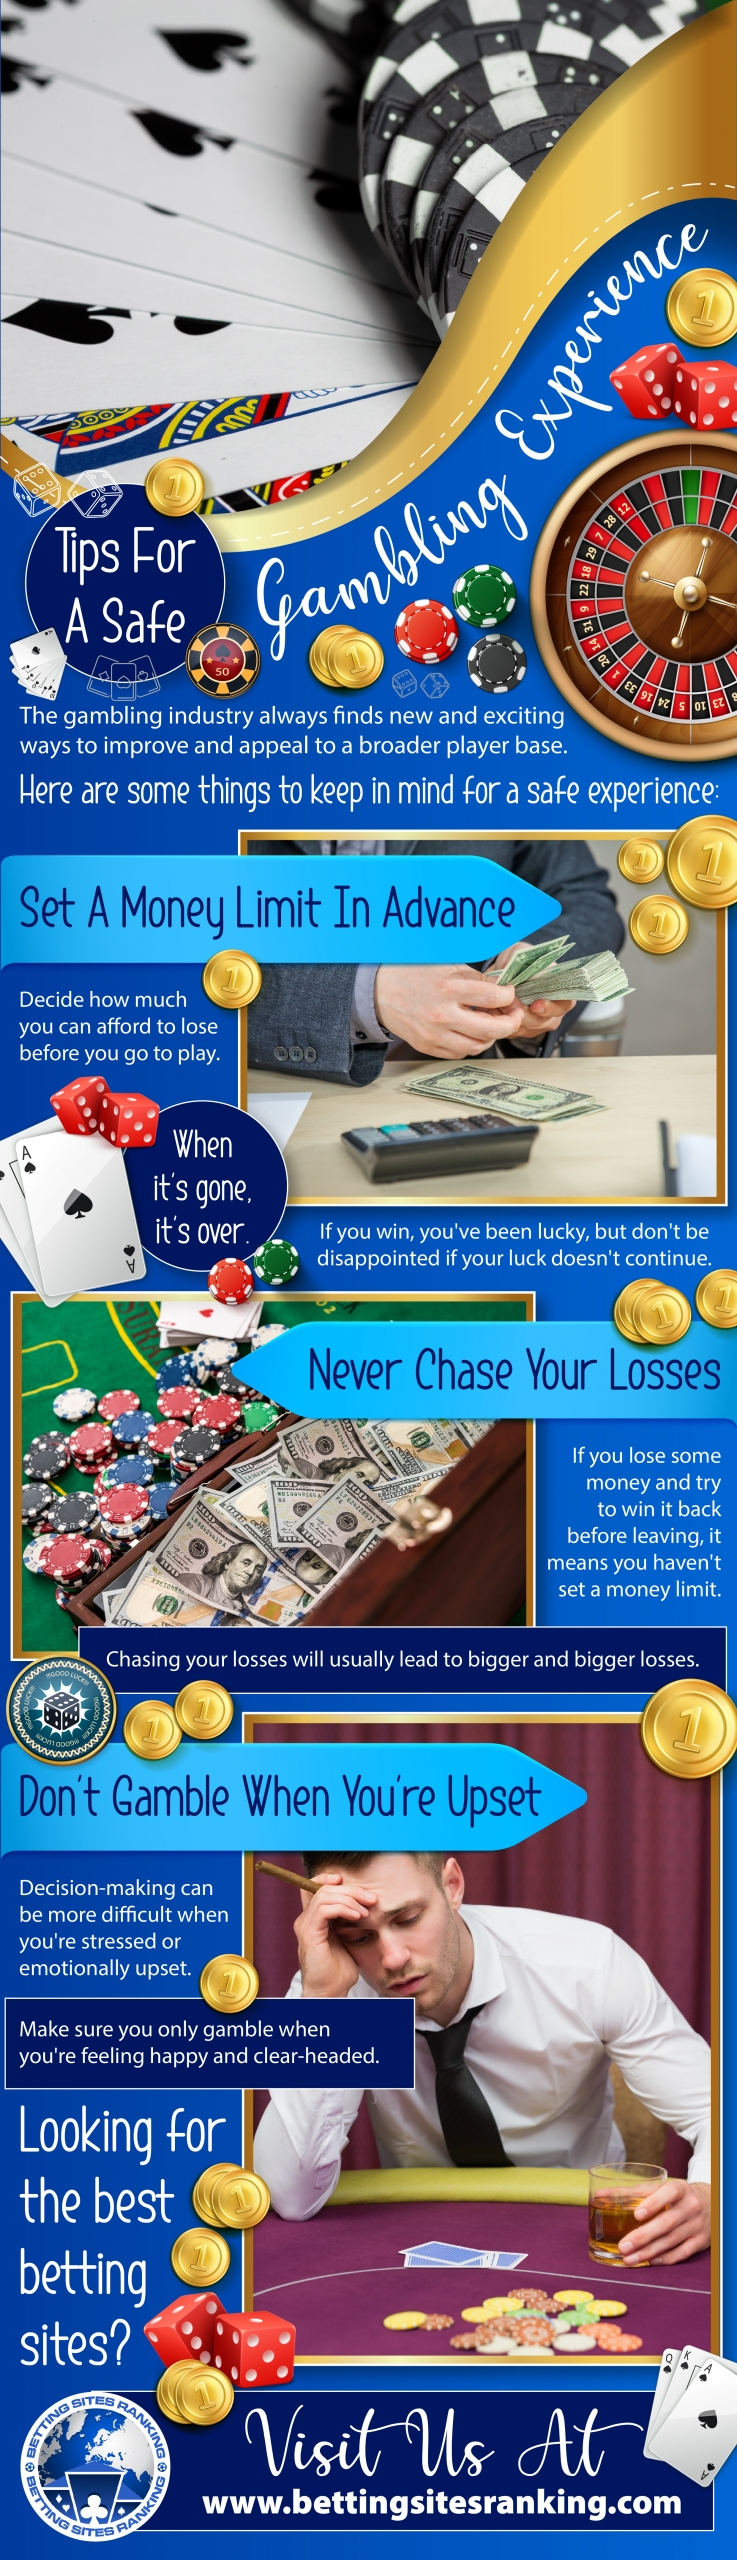 Tips-For-A-Safe-Gambling-Experience